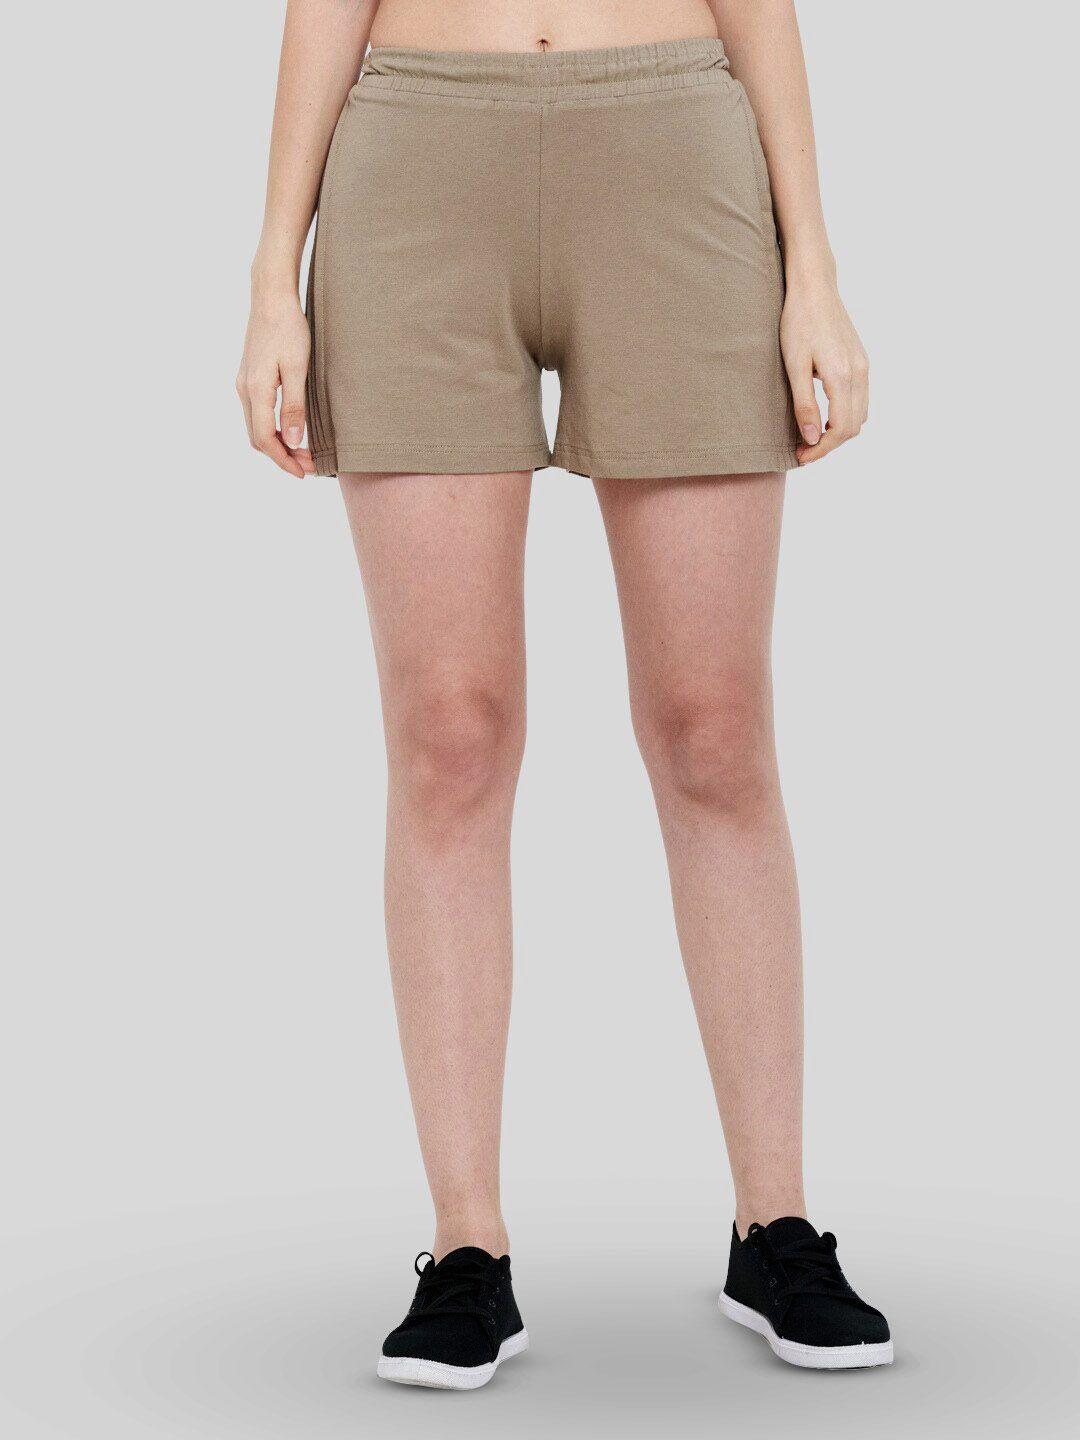 unmade women regular fit mid-rise cotton shorts